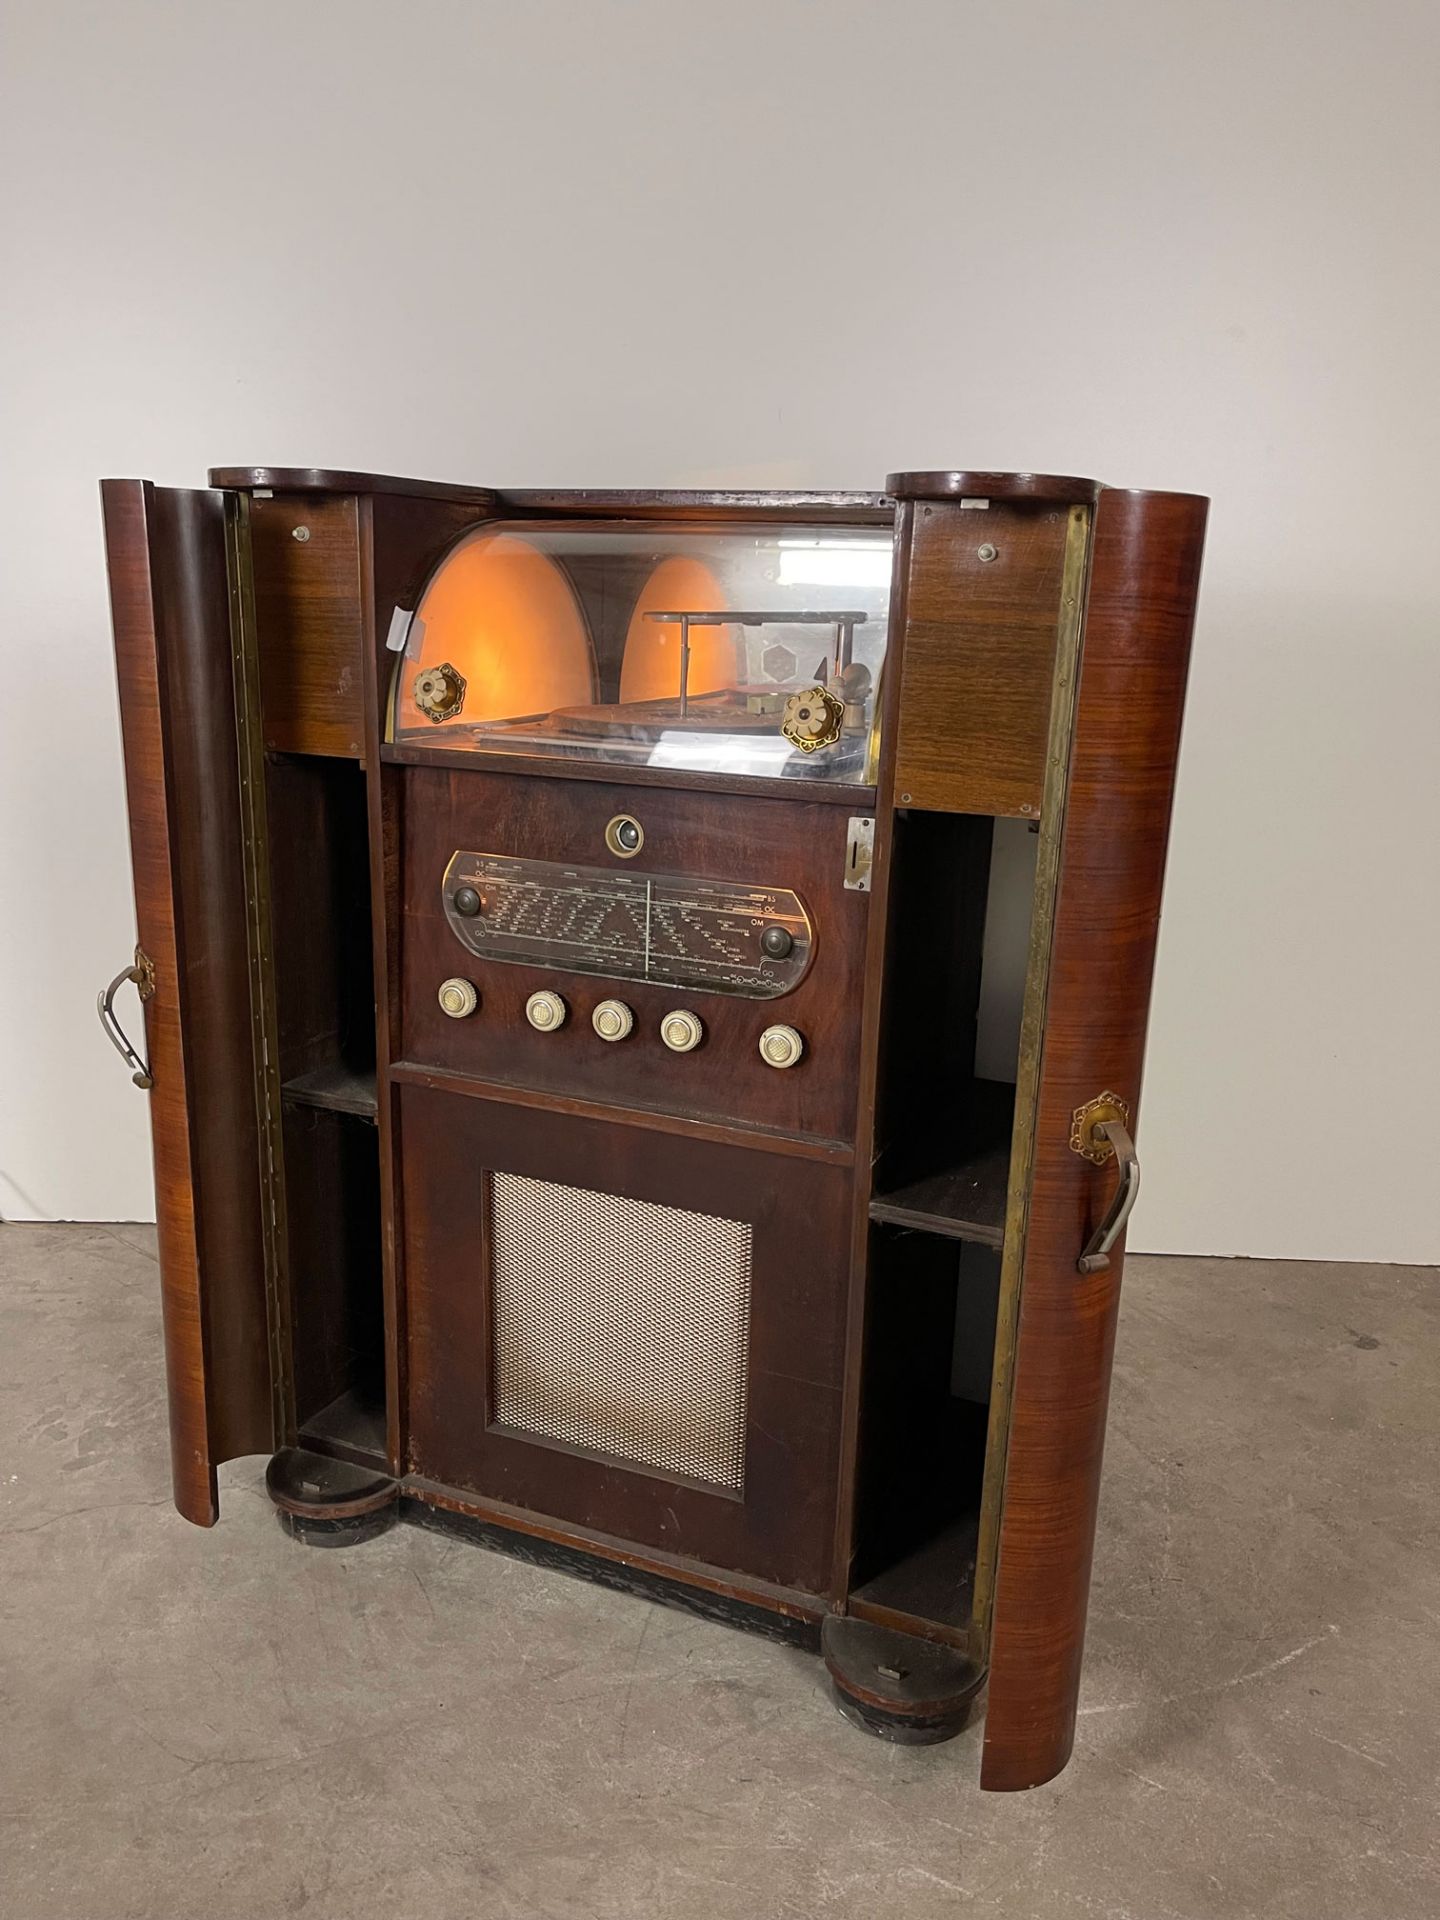 Mid-Fifties Valcke Heule Belgian Coin-Op Radio & Record Player - Image 11 of 15